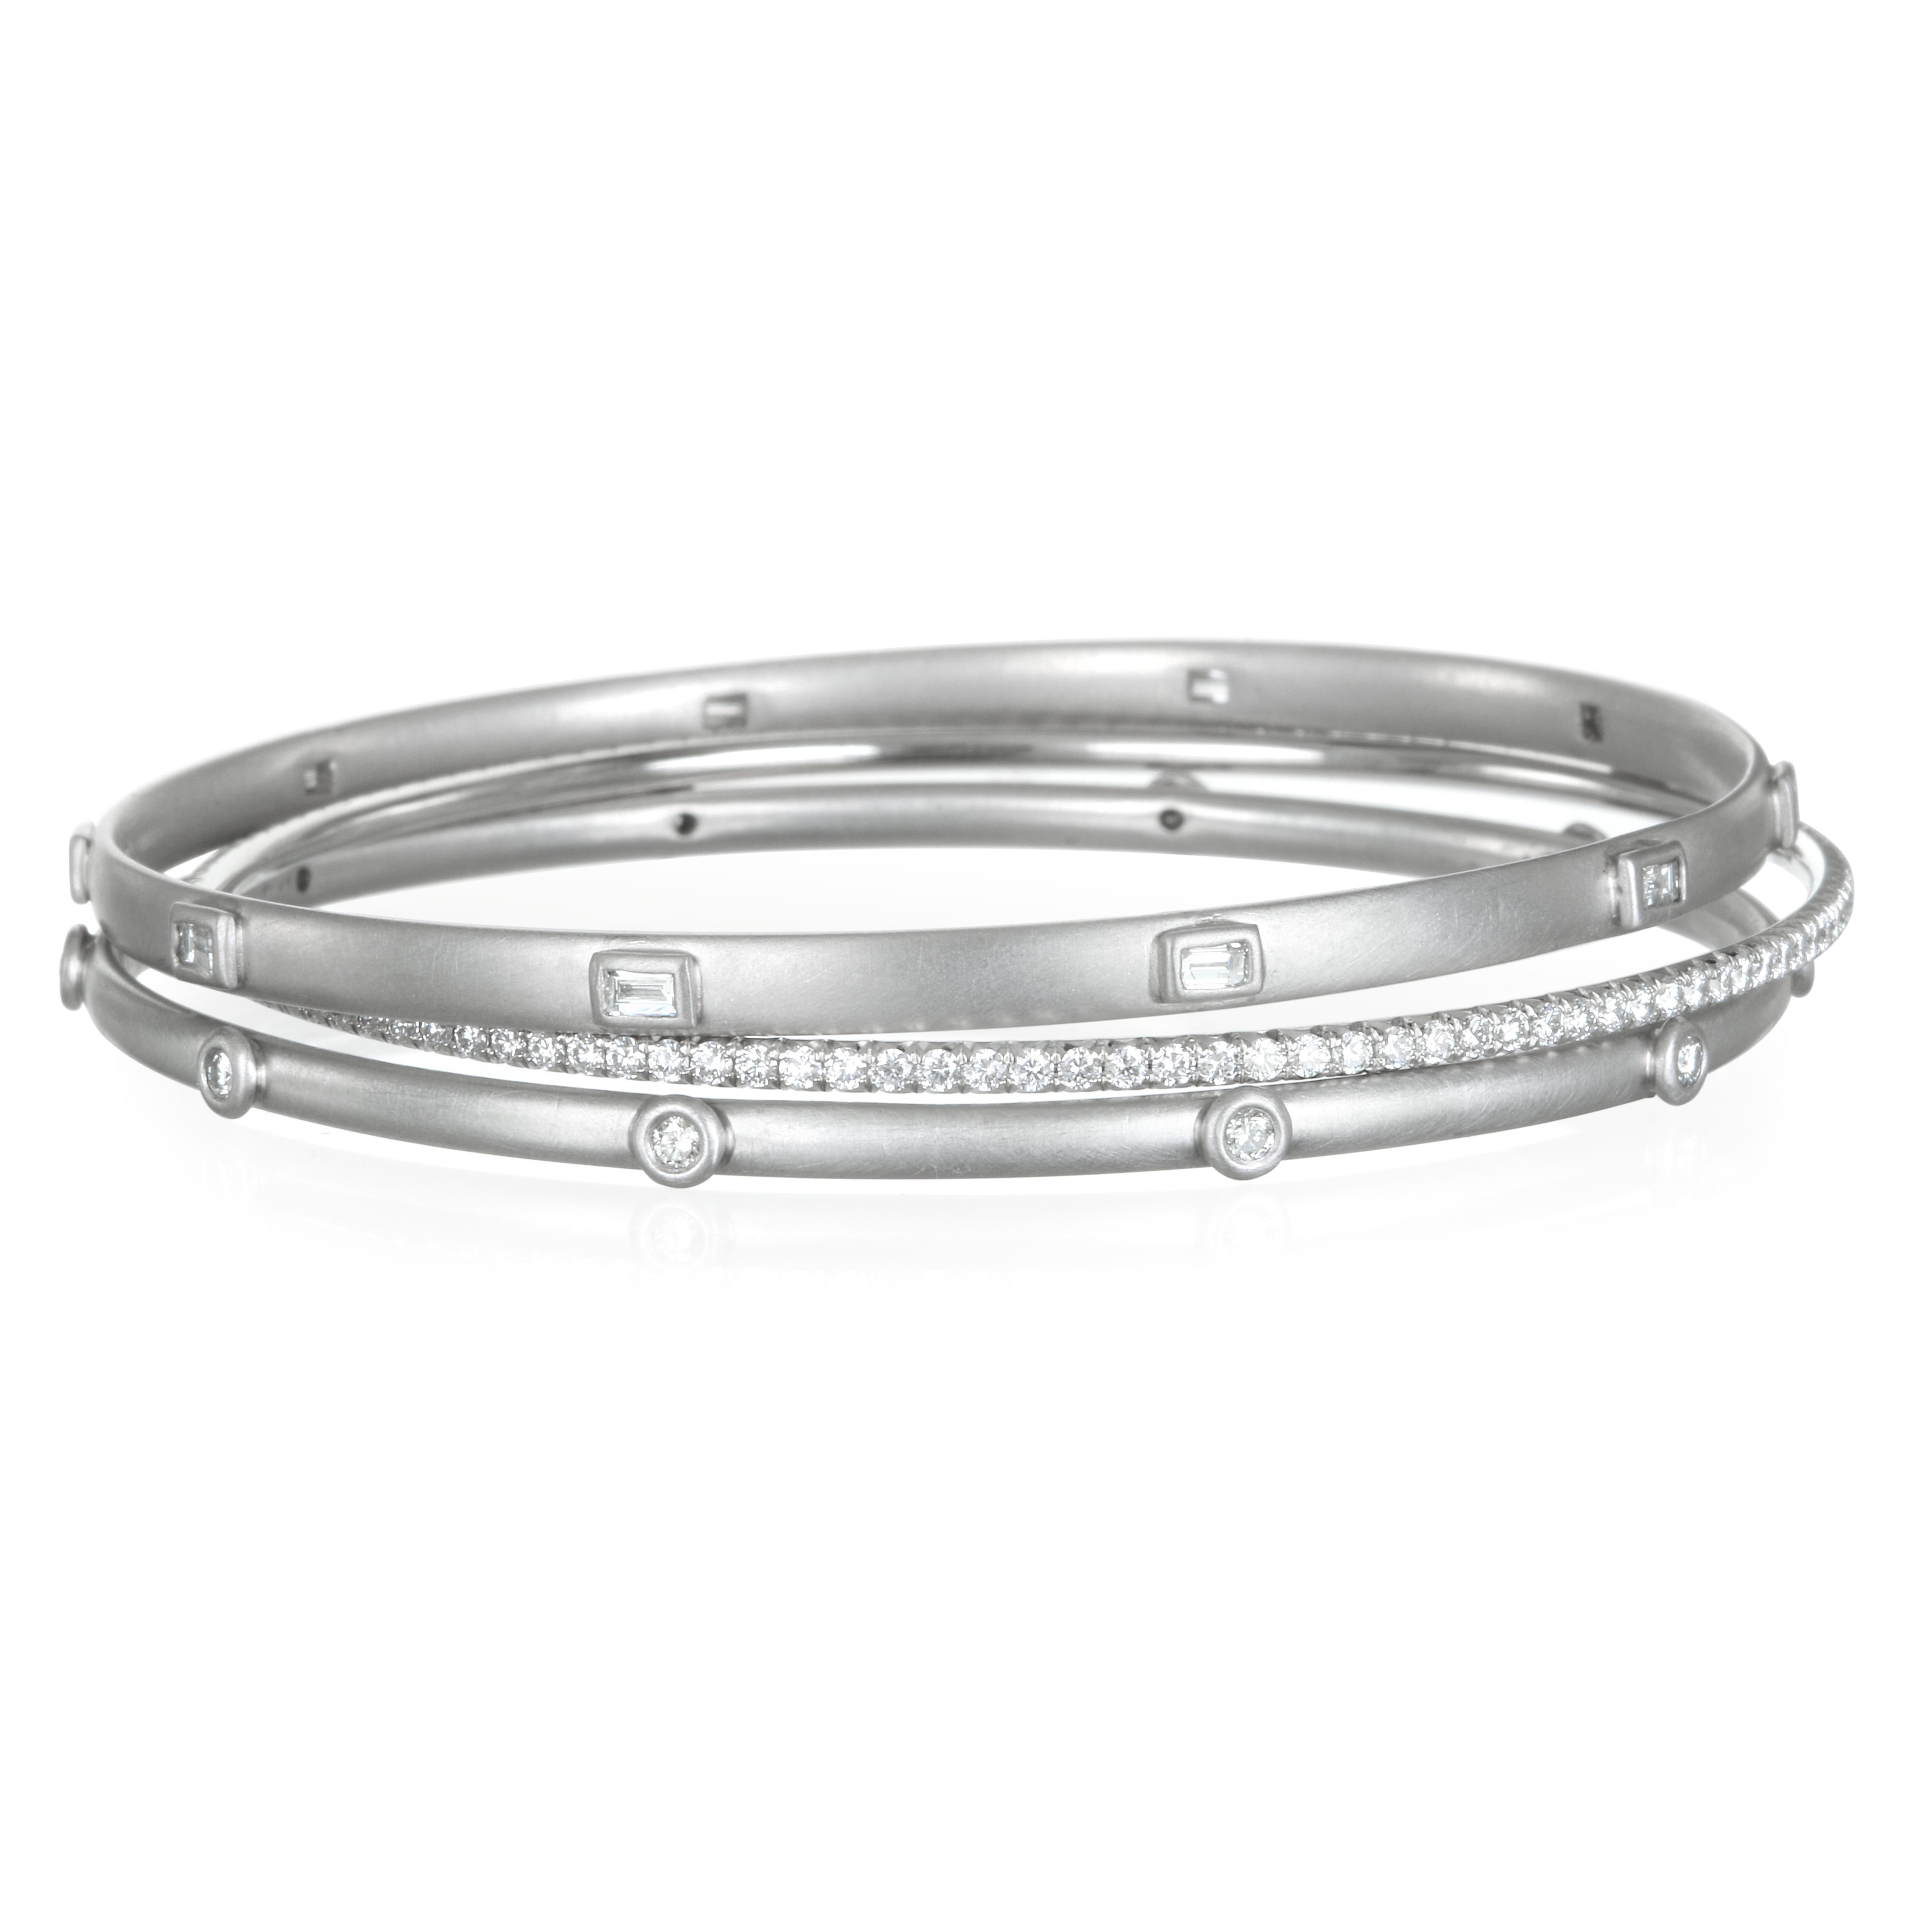 Faye Kim's handcrafted Platinum diamond bezel bangle with a matte finish. Modern, sophisticated and eminently wearable, each round brilliant cut diamond is bezel-set for added sparkle.

Diamonds: .30 Carats tcw
Size: 2.5